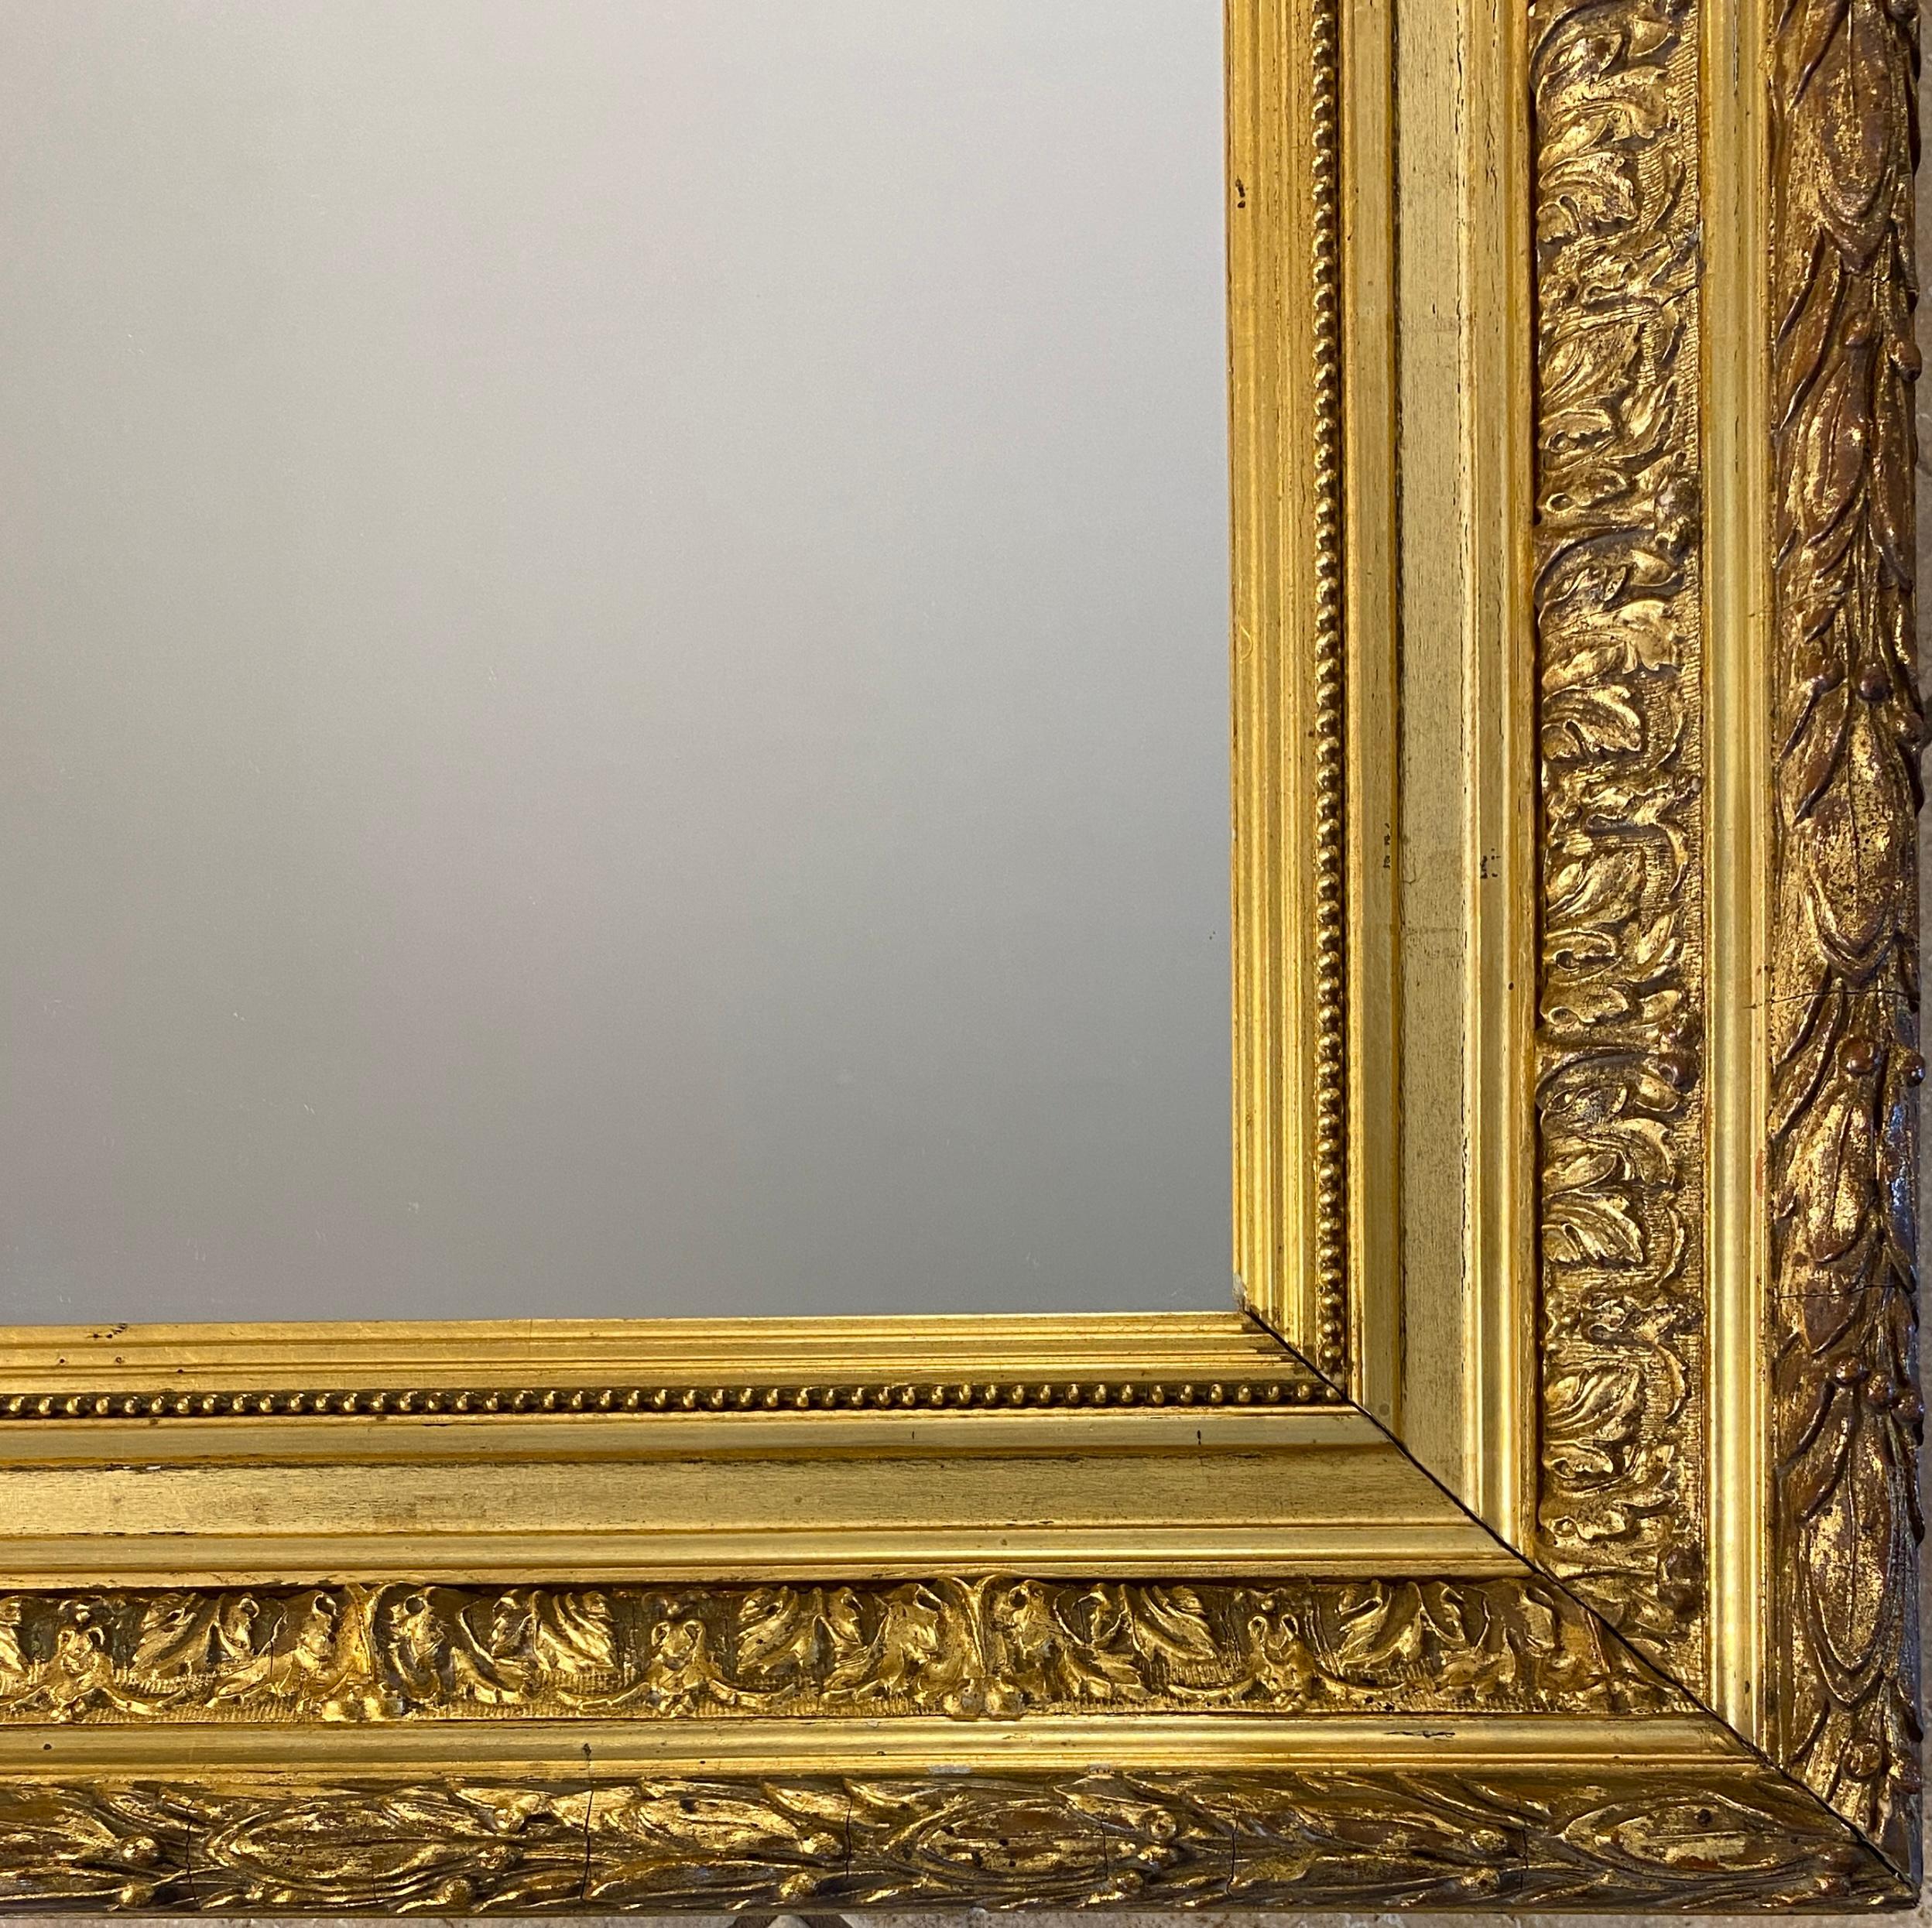 A generously sized rectangular Louis XVI style mirror featuring an intricately carved giltwood frame with an exceptional level of detail. It reflects the grandiose, ornamental Louis XVI style, and it includes an array of period motifs. Its finely